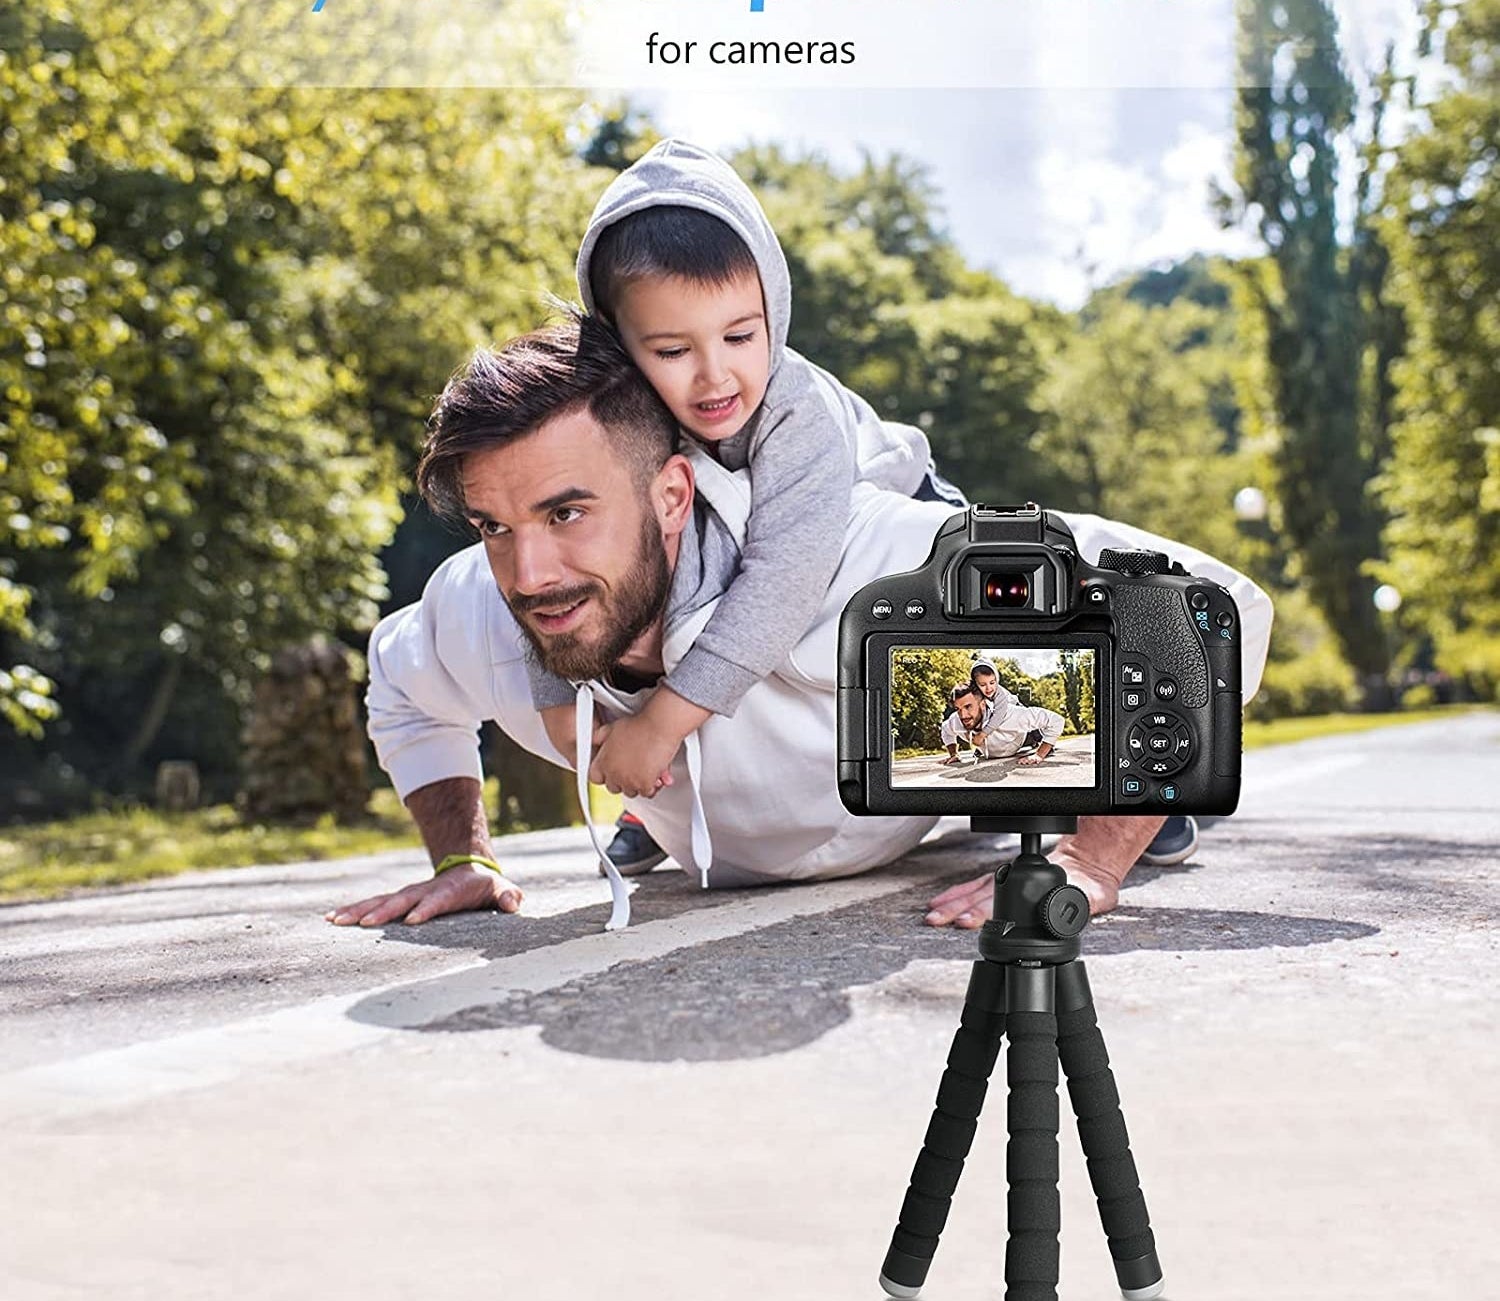 person with their child on their back taking a video with the tripod